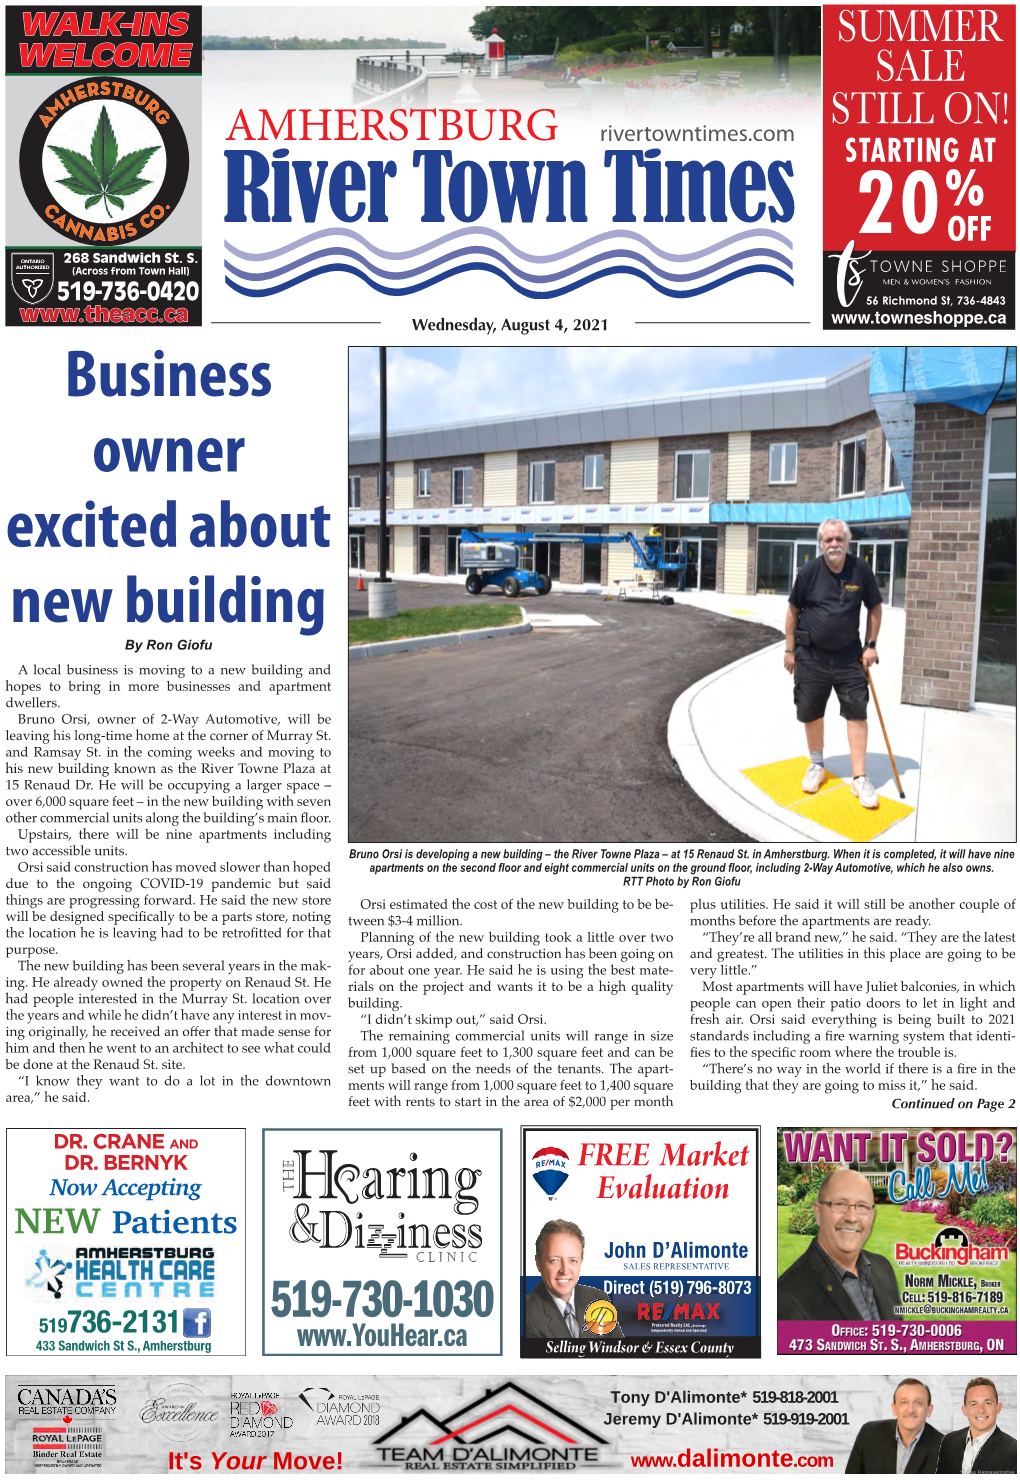 Business Owner Excited About New Building by Ron Giofu a Local Business Is Moving to a New Building and Hopes to Bring in More Businesses and Apartment Dwellers